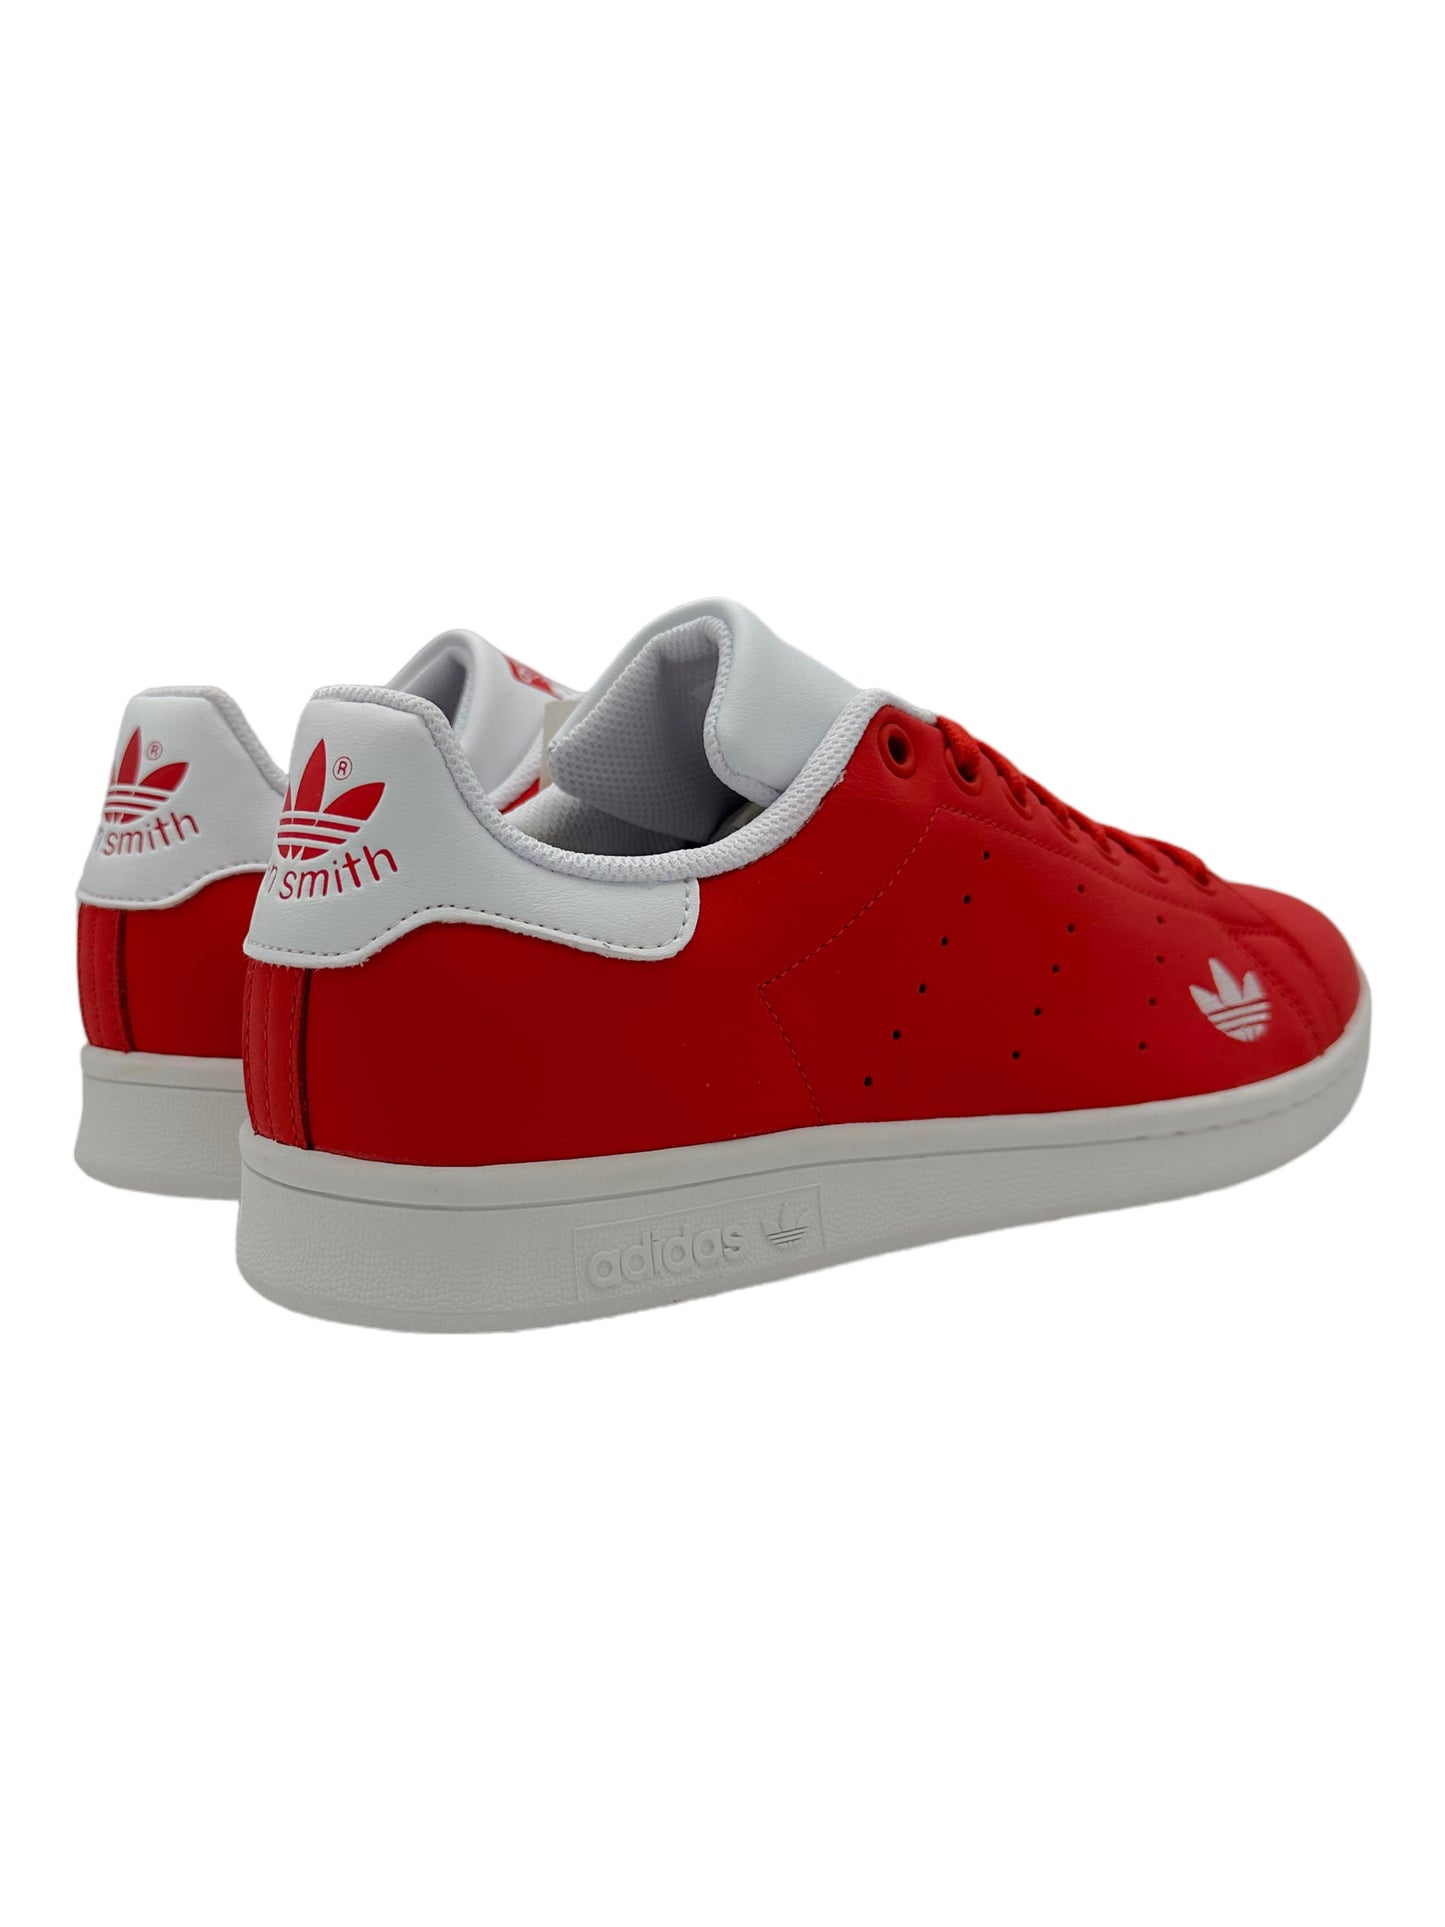 Adidas Stan Smith Red & White Sneakers - Genuine Design Luxury Consignment for Men. New & Pre-Owned Clothing, Shoes, & Accessories. Calgary, Canada